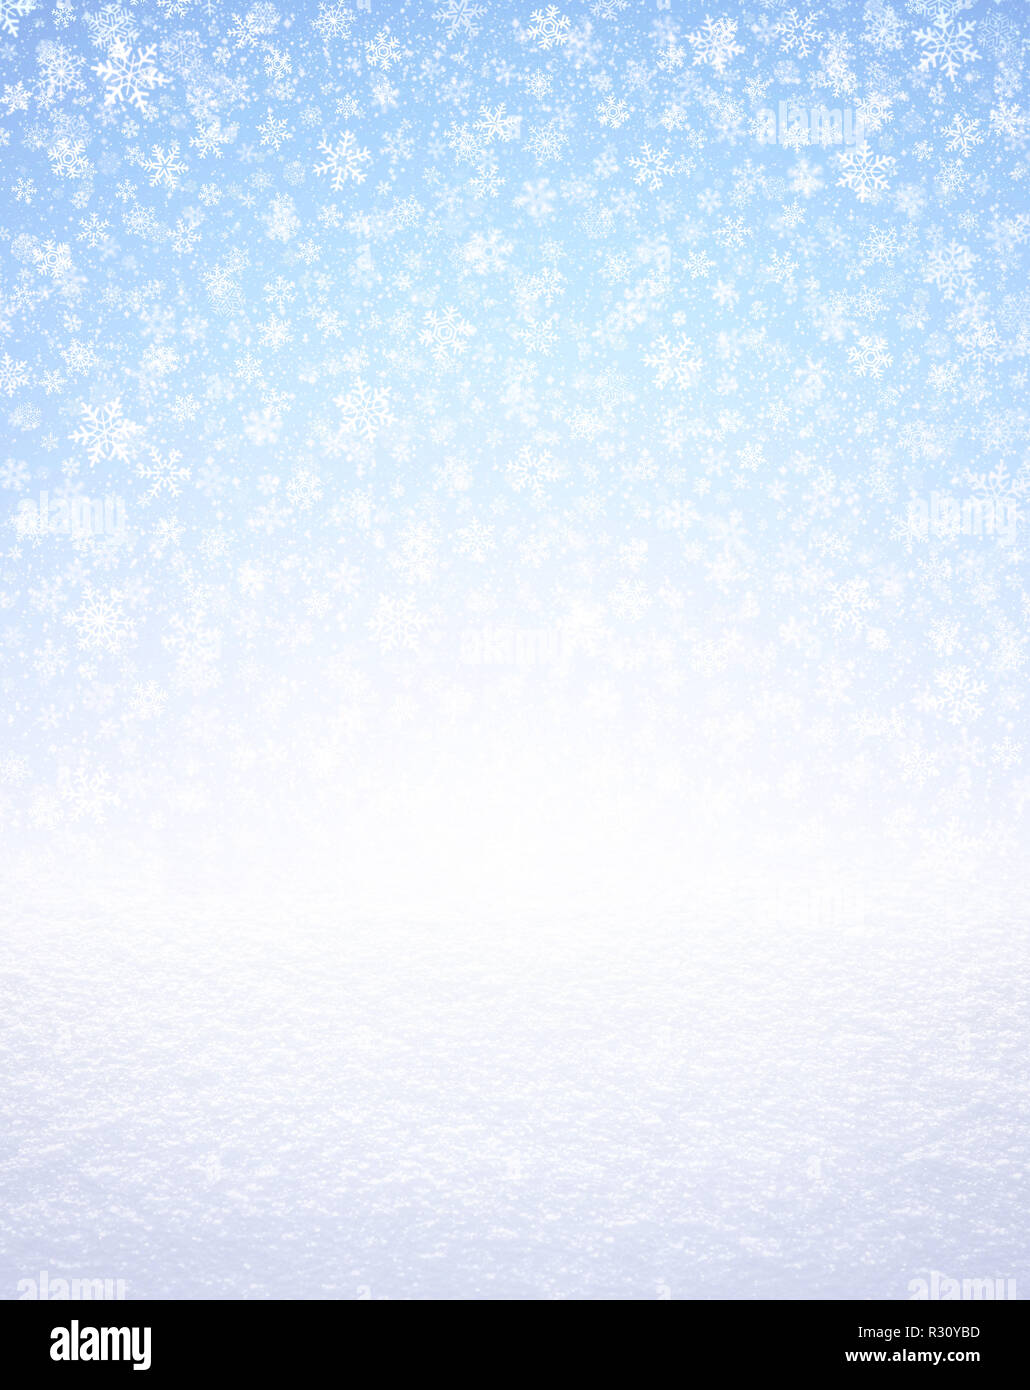 Snowflakes shapes on an icy blue background, falling on a white snow covered ground. Winter seasonal material. Stock Photo